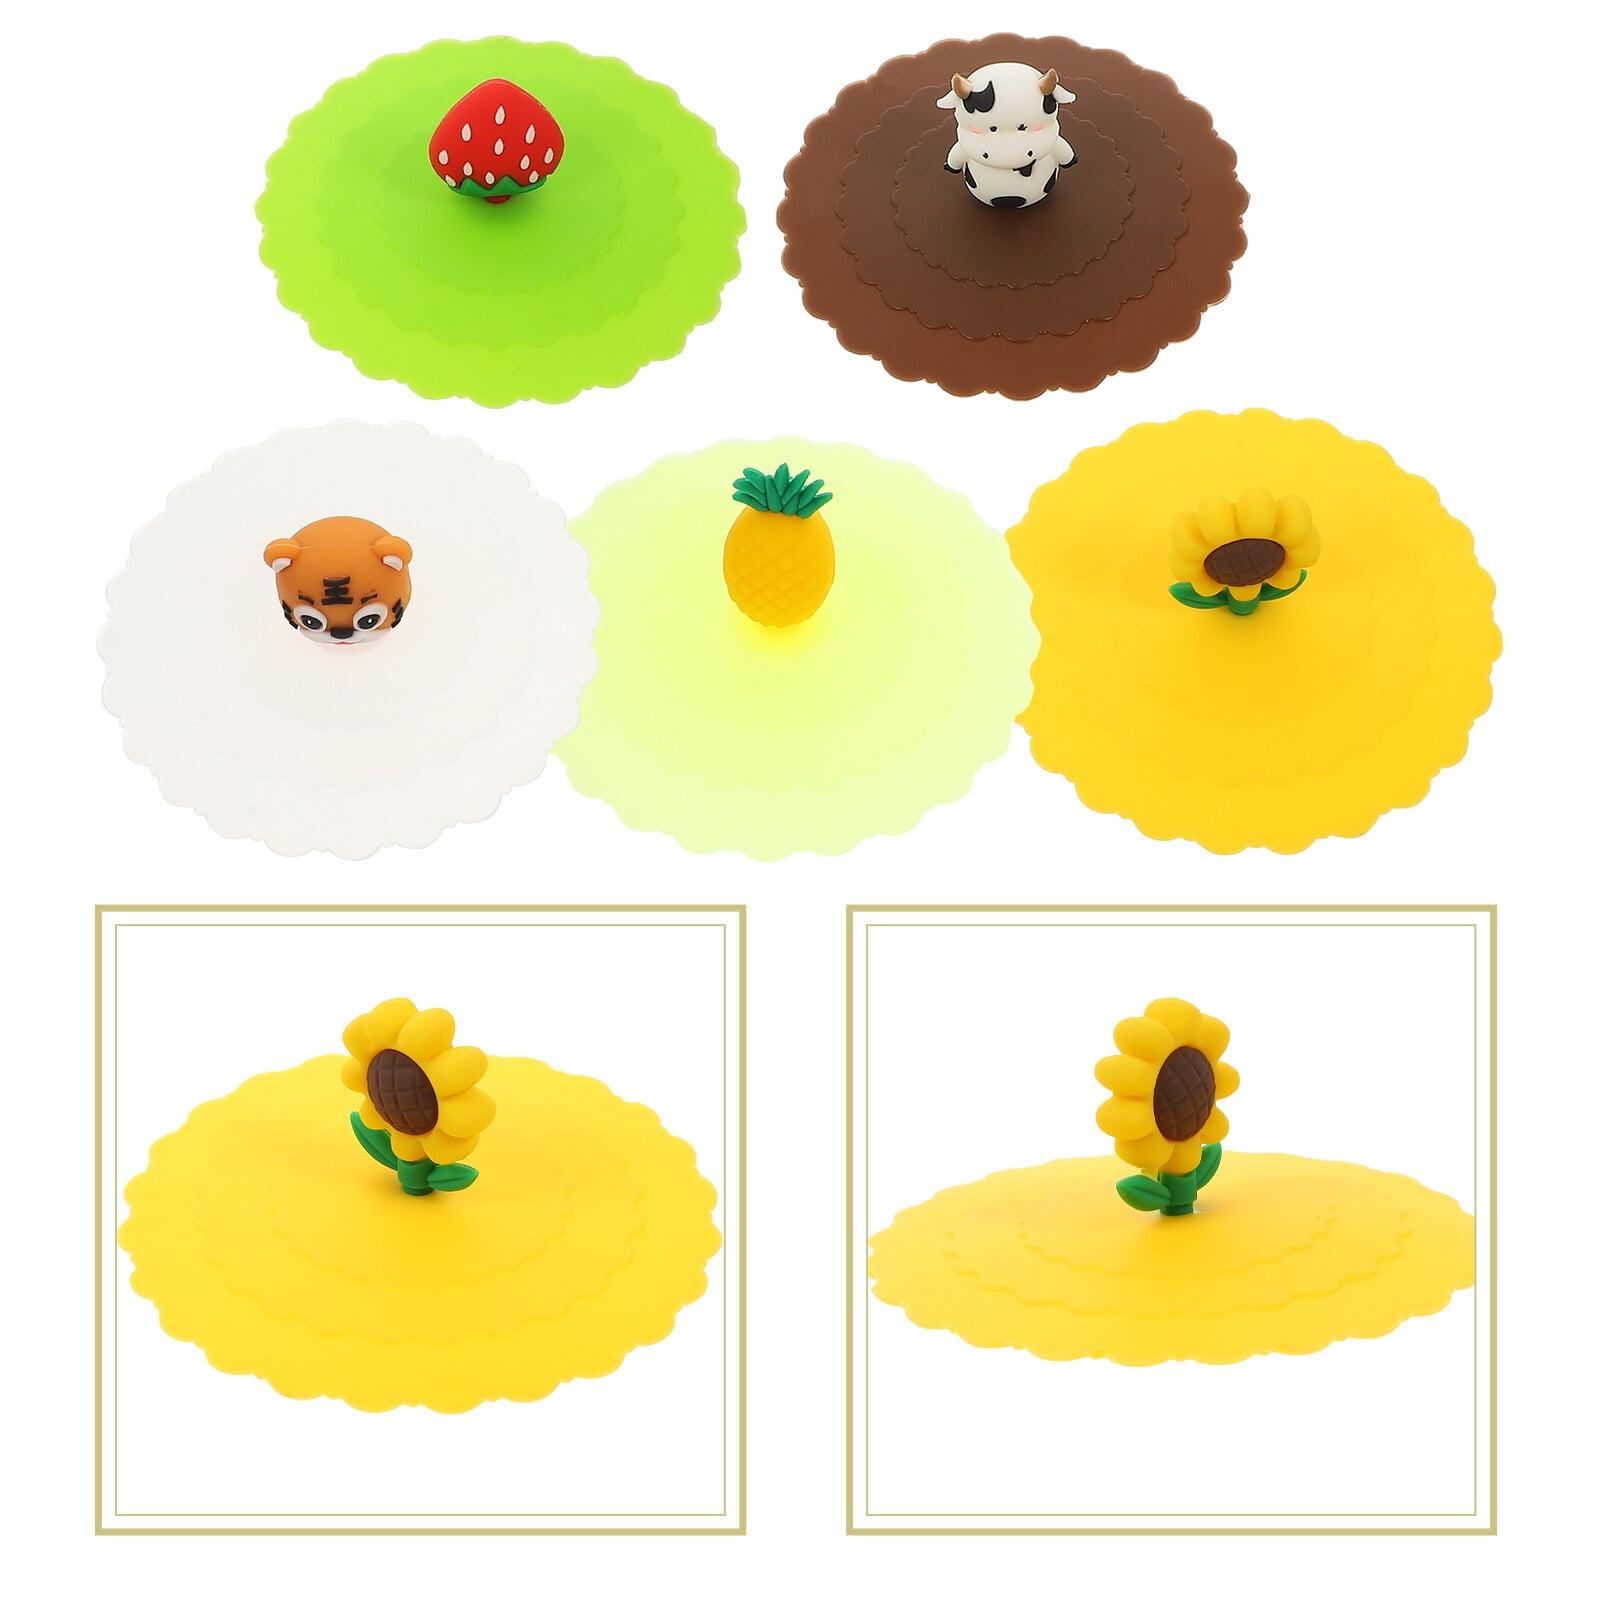 5PCS New Cute Anti-dust Silicone Glass Cup Cover Coffee Mug Suction Seal  Lid Cap,Random Colors and Random Modelling